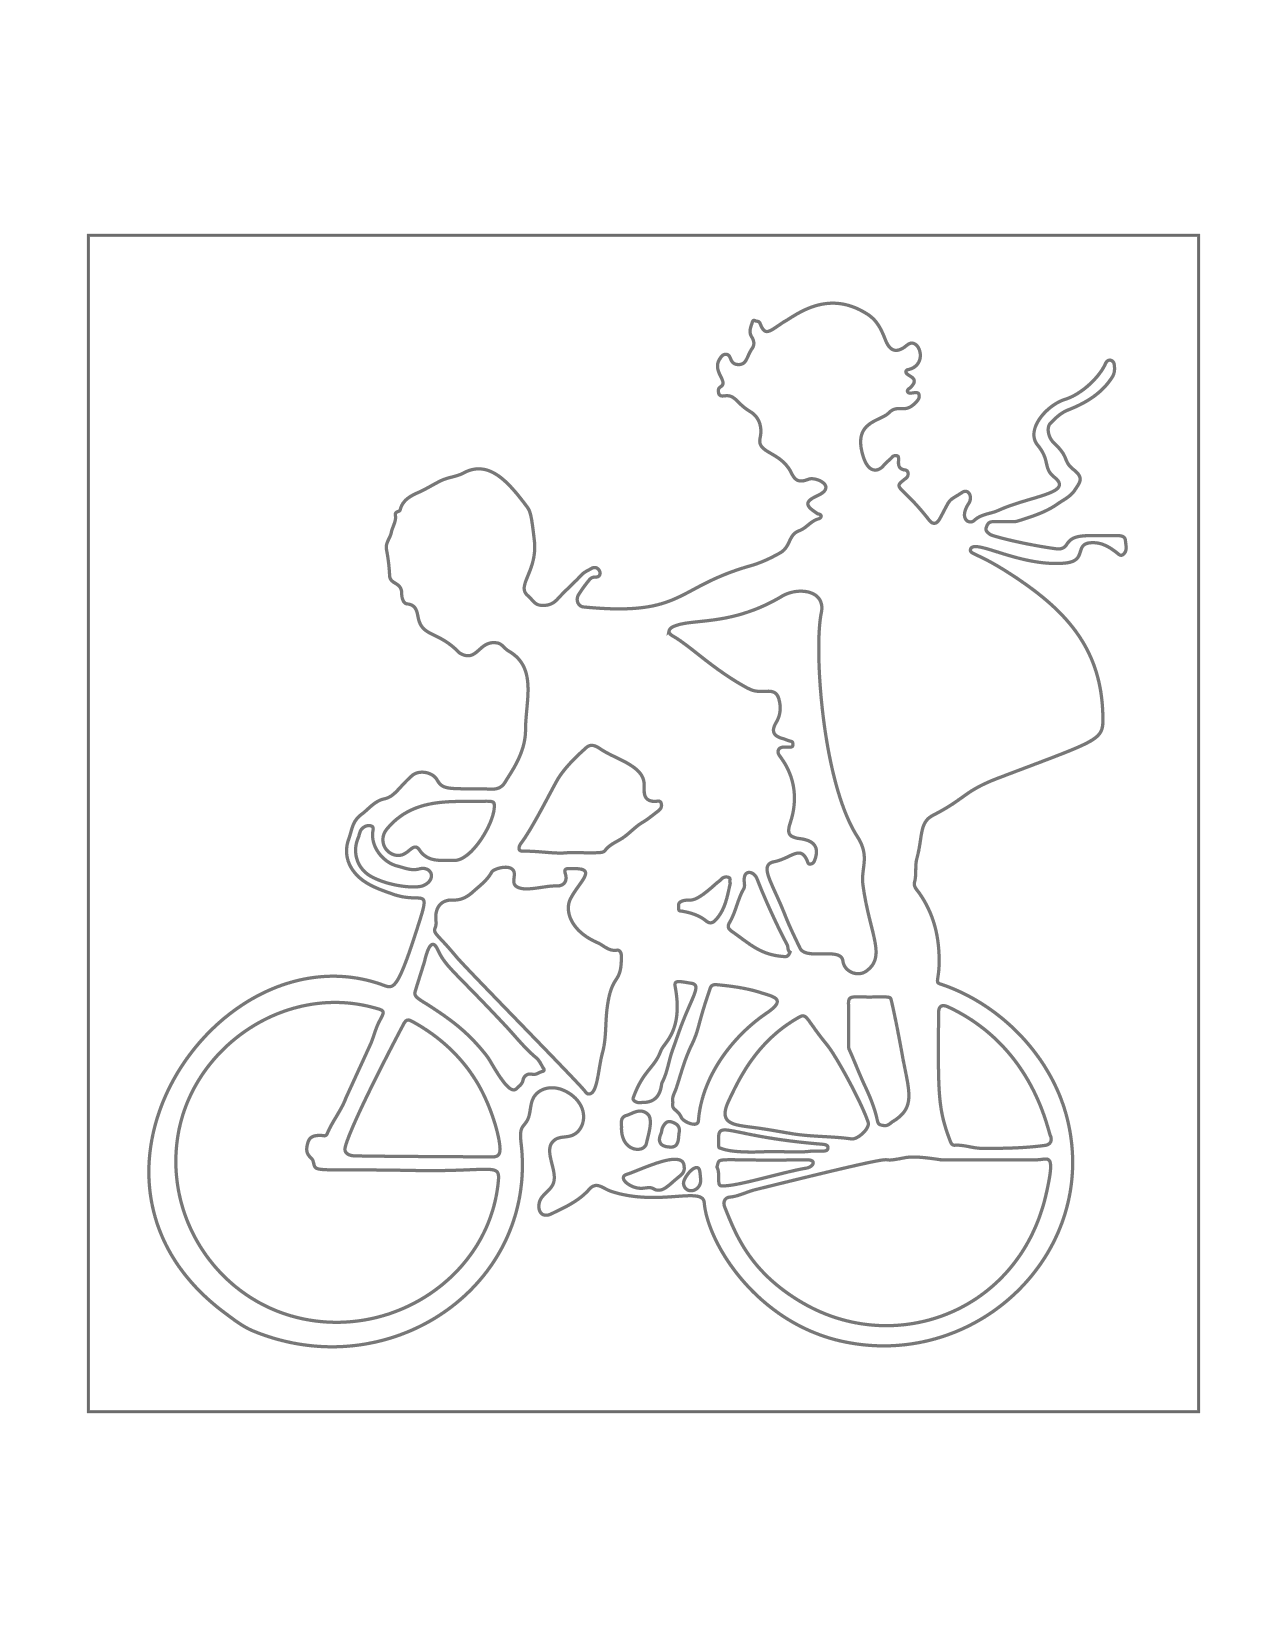 Outline Of 2 Kids On A Bike For Coloring